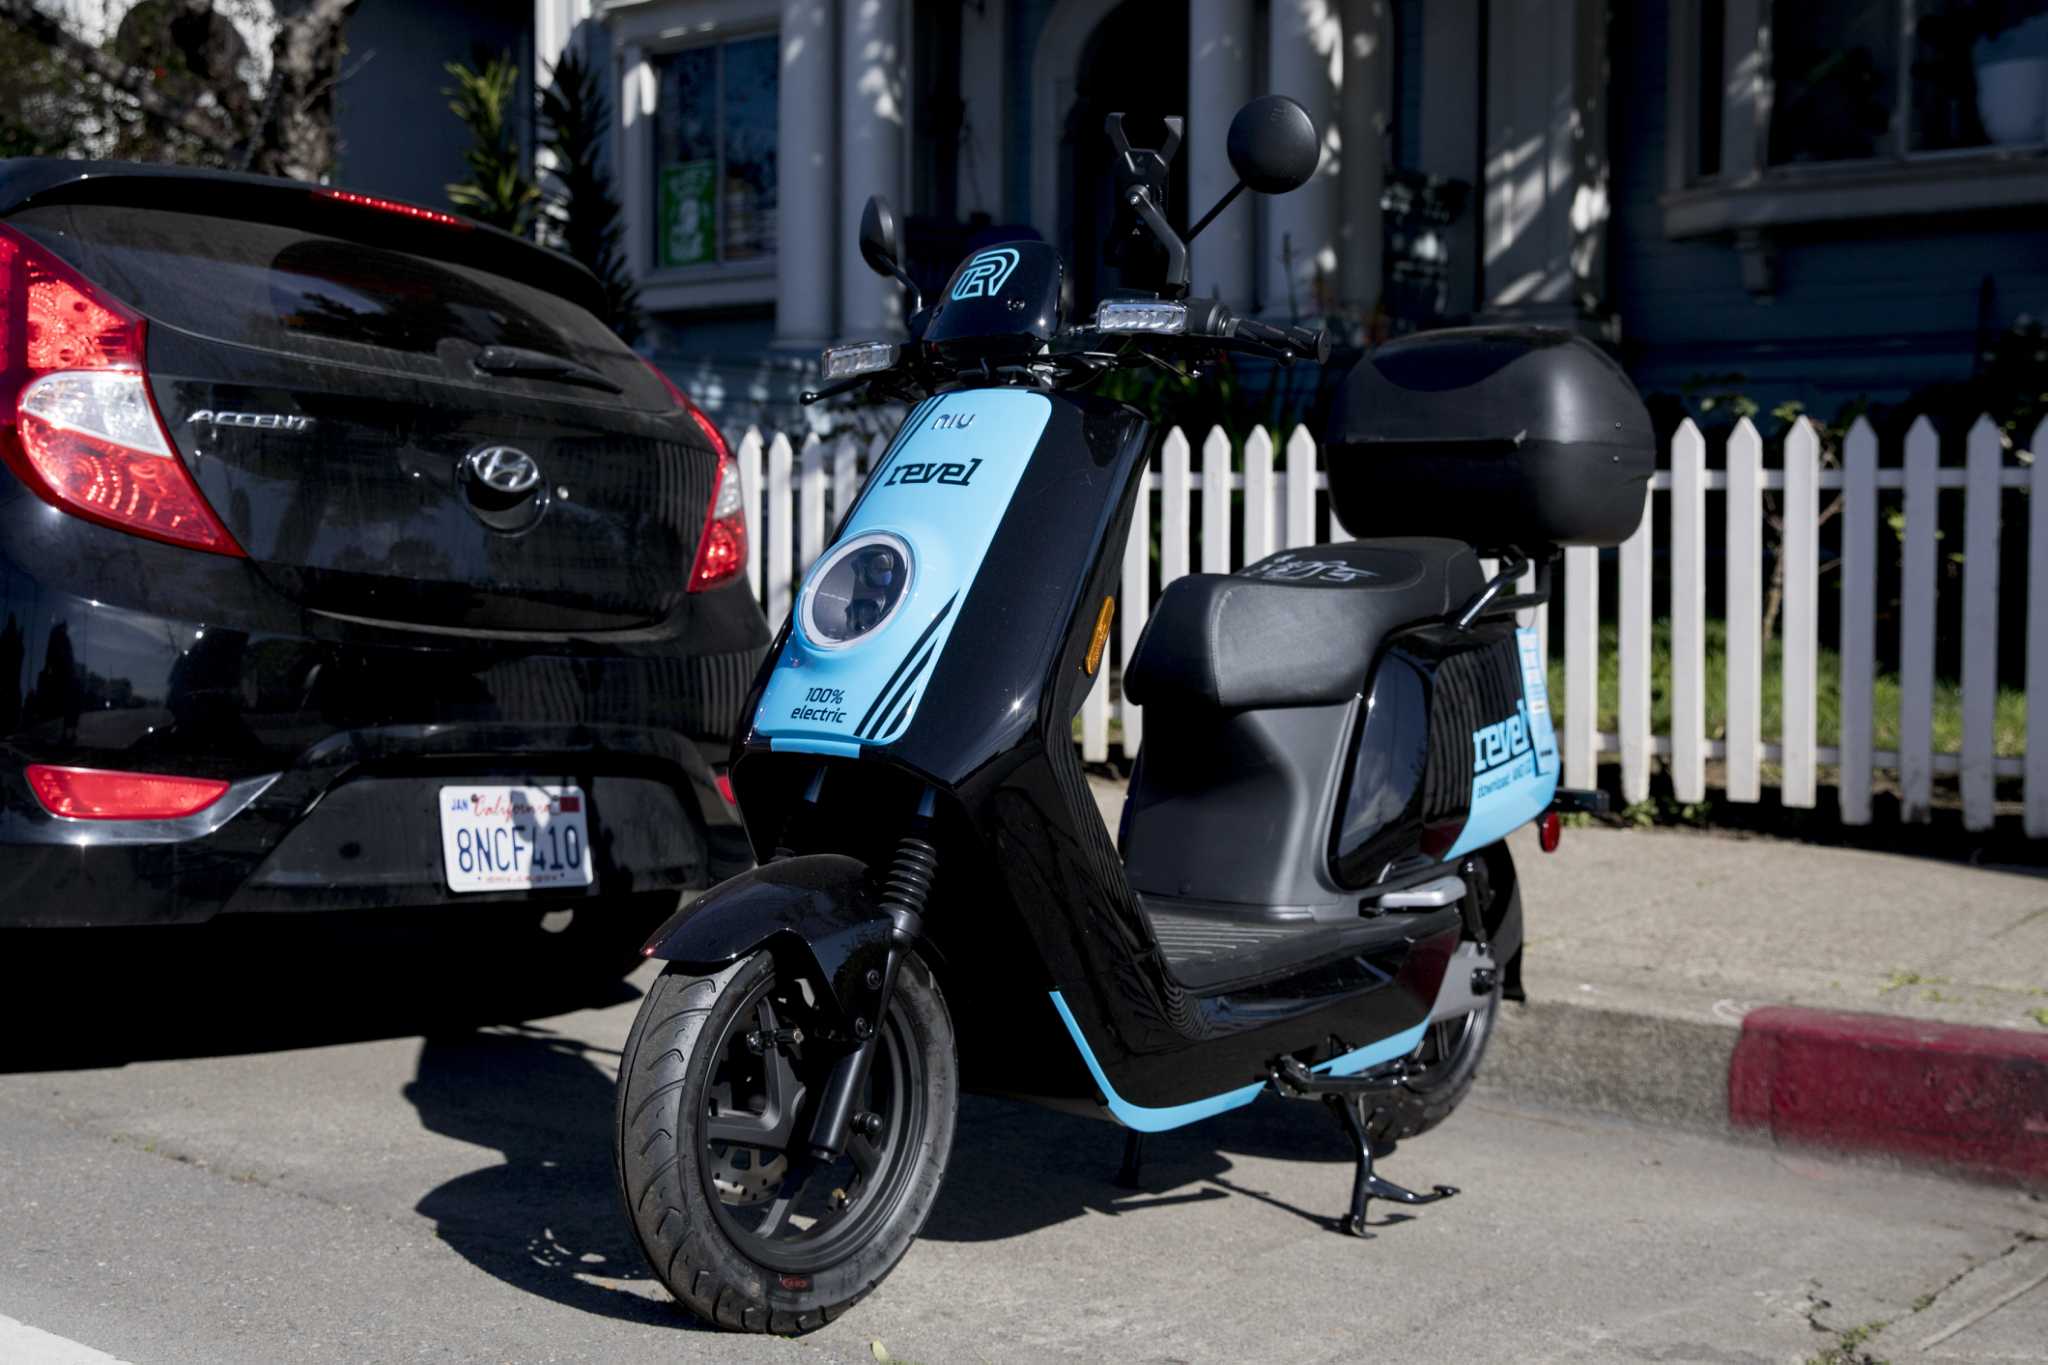 Revel Scooter Sharing Service Ceases After Ridership Plummets